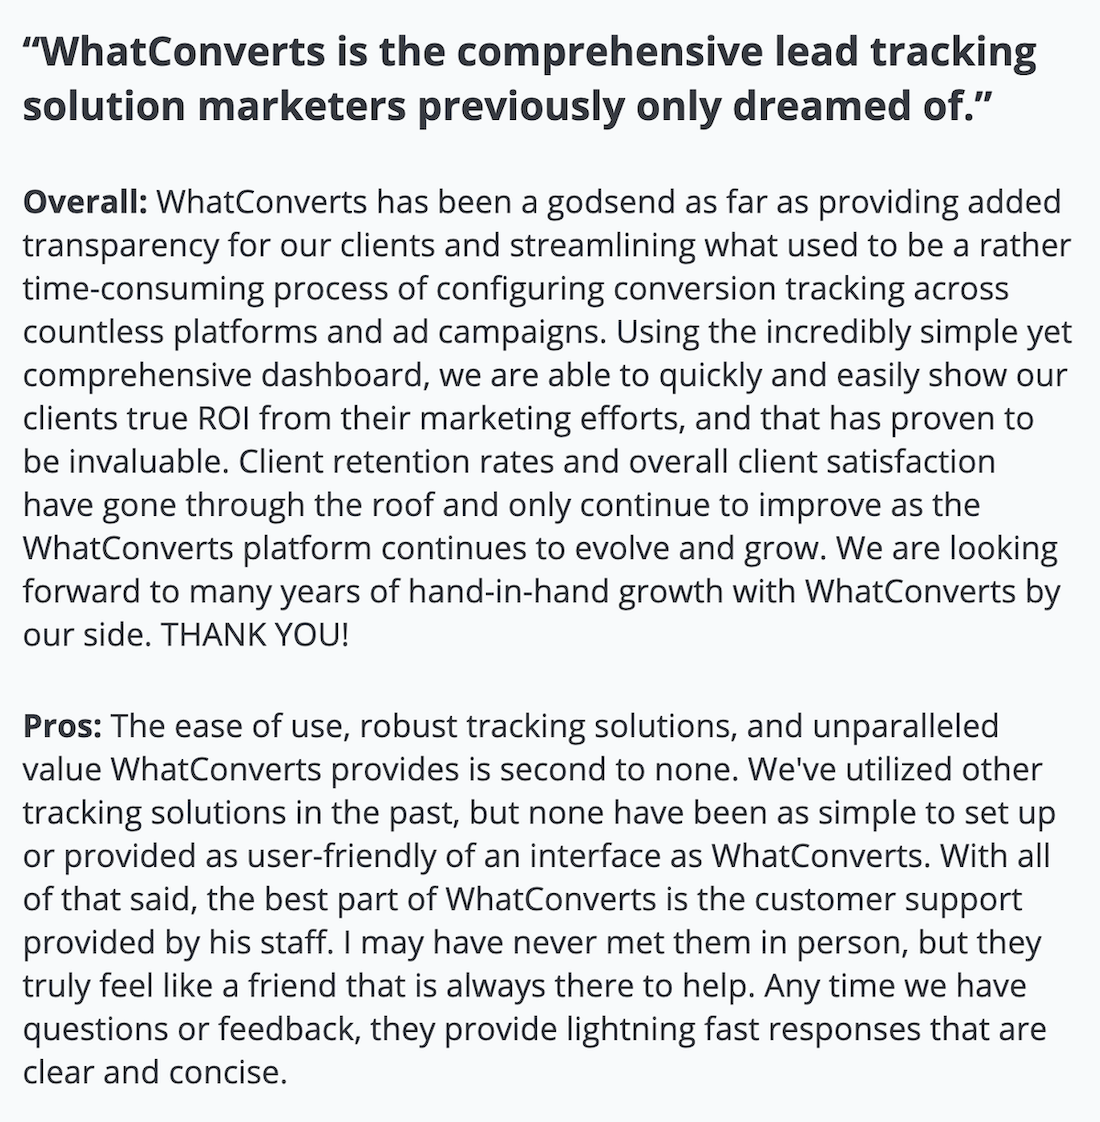 WhatConverts review: "WhatConverts is the comprehensive lead tracking solution marketers previously only dreamed of."